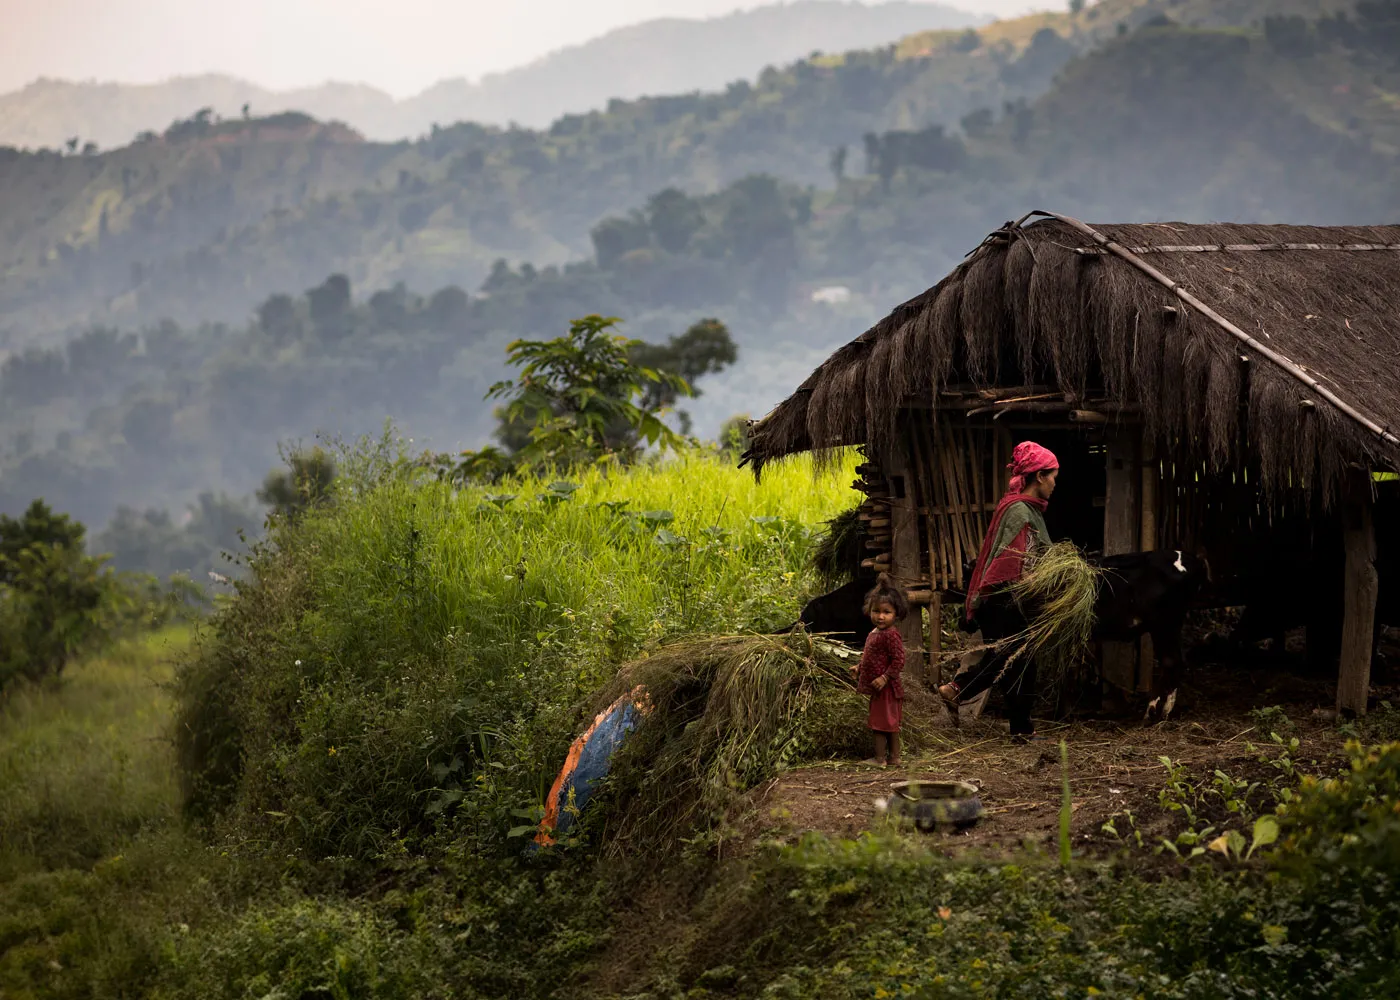 A Nepali woman carries grass by a wooden house. A small child stands next to her.